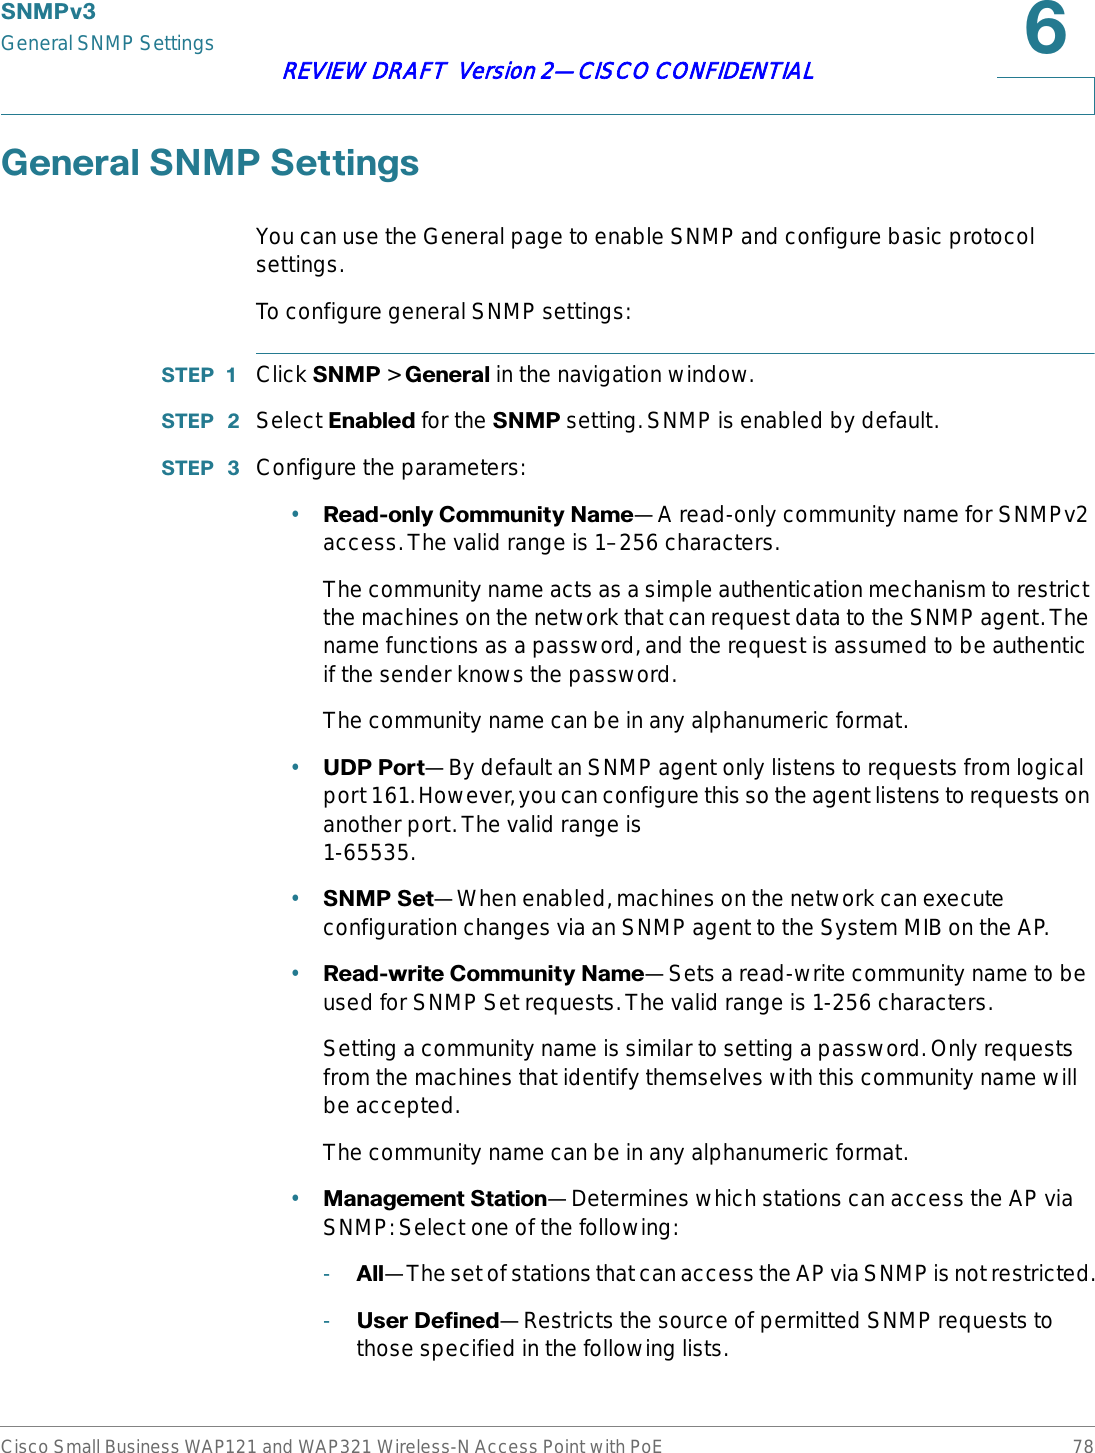 6103YGeneral SNMP SettingsCisco Small Business WAP121 and WAP321 Wireless-N Access Point with PoE 78REVIEW DRAFT  Version 2—CISCO CONFIDENTIAL*HQHUDO61036HWWLQJVYou can use the General page to enable SNMP and configure basic protocol settings.To configure general SNMP settings:67(3  Click 6103&gt;*HQHUDO in the navigation window.67(3  Select (QDEOHG for the 6103 setting. SNMP is enabled by default. 67(3  Configure the parameters:•5HDGRQO\&amp;RPPXQLW\1DPH—A read-only community name for SNMPv2 access. The valid range is 1–256 characters.The community name acts as a simple authentication mechanism to restrict the machines on the network that can request data to the SNMP agent. The name functions as a password, and the request is assumed to be authentic if the sender knows the password.The community name can be in any alphanumeric format.•8&apos;33RUW—By default an SNMP agent only listens to requests from logical port 161. However, you can configure this so the agent listens to requests on another port. The valid range is 1-65535.•61036HW—When enabled, machines on the network can execute configuration changes via an SNMP agent to the System MIB on the AP.•5HDGZULWH&amp;RPPXQLW\1DPH—Sets a read-write community name to be used for SNMP Set requests. The valid range is 1-256 characters. Setting a community name is similar to setting a password. Only requests from the machines that identify themselves with this community name will be accepted.The community name can be in any alphanumeric format.•0DQDJHPHQW6WDWLRQ—Determines which stations can access the AP via SNMP: Select one of the following:-$OO—The set of stations that can access the AP via SNMP is not restricted.-8VHU&apos;HILQHG—Restricts the source of permitted SNMP requests to those specified in the following lists.